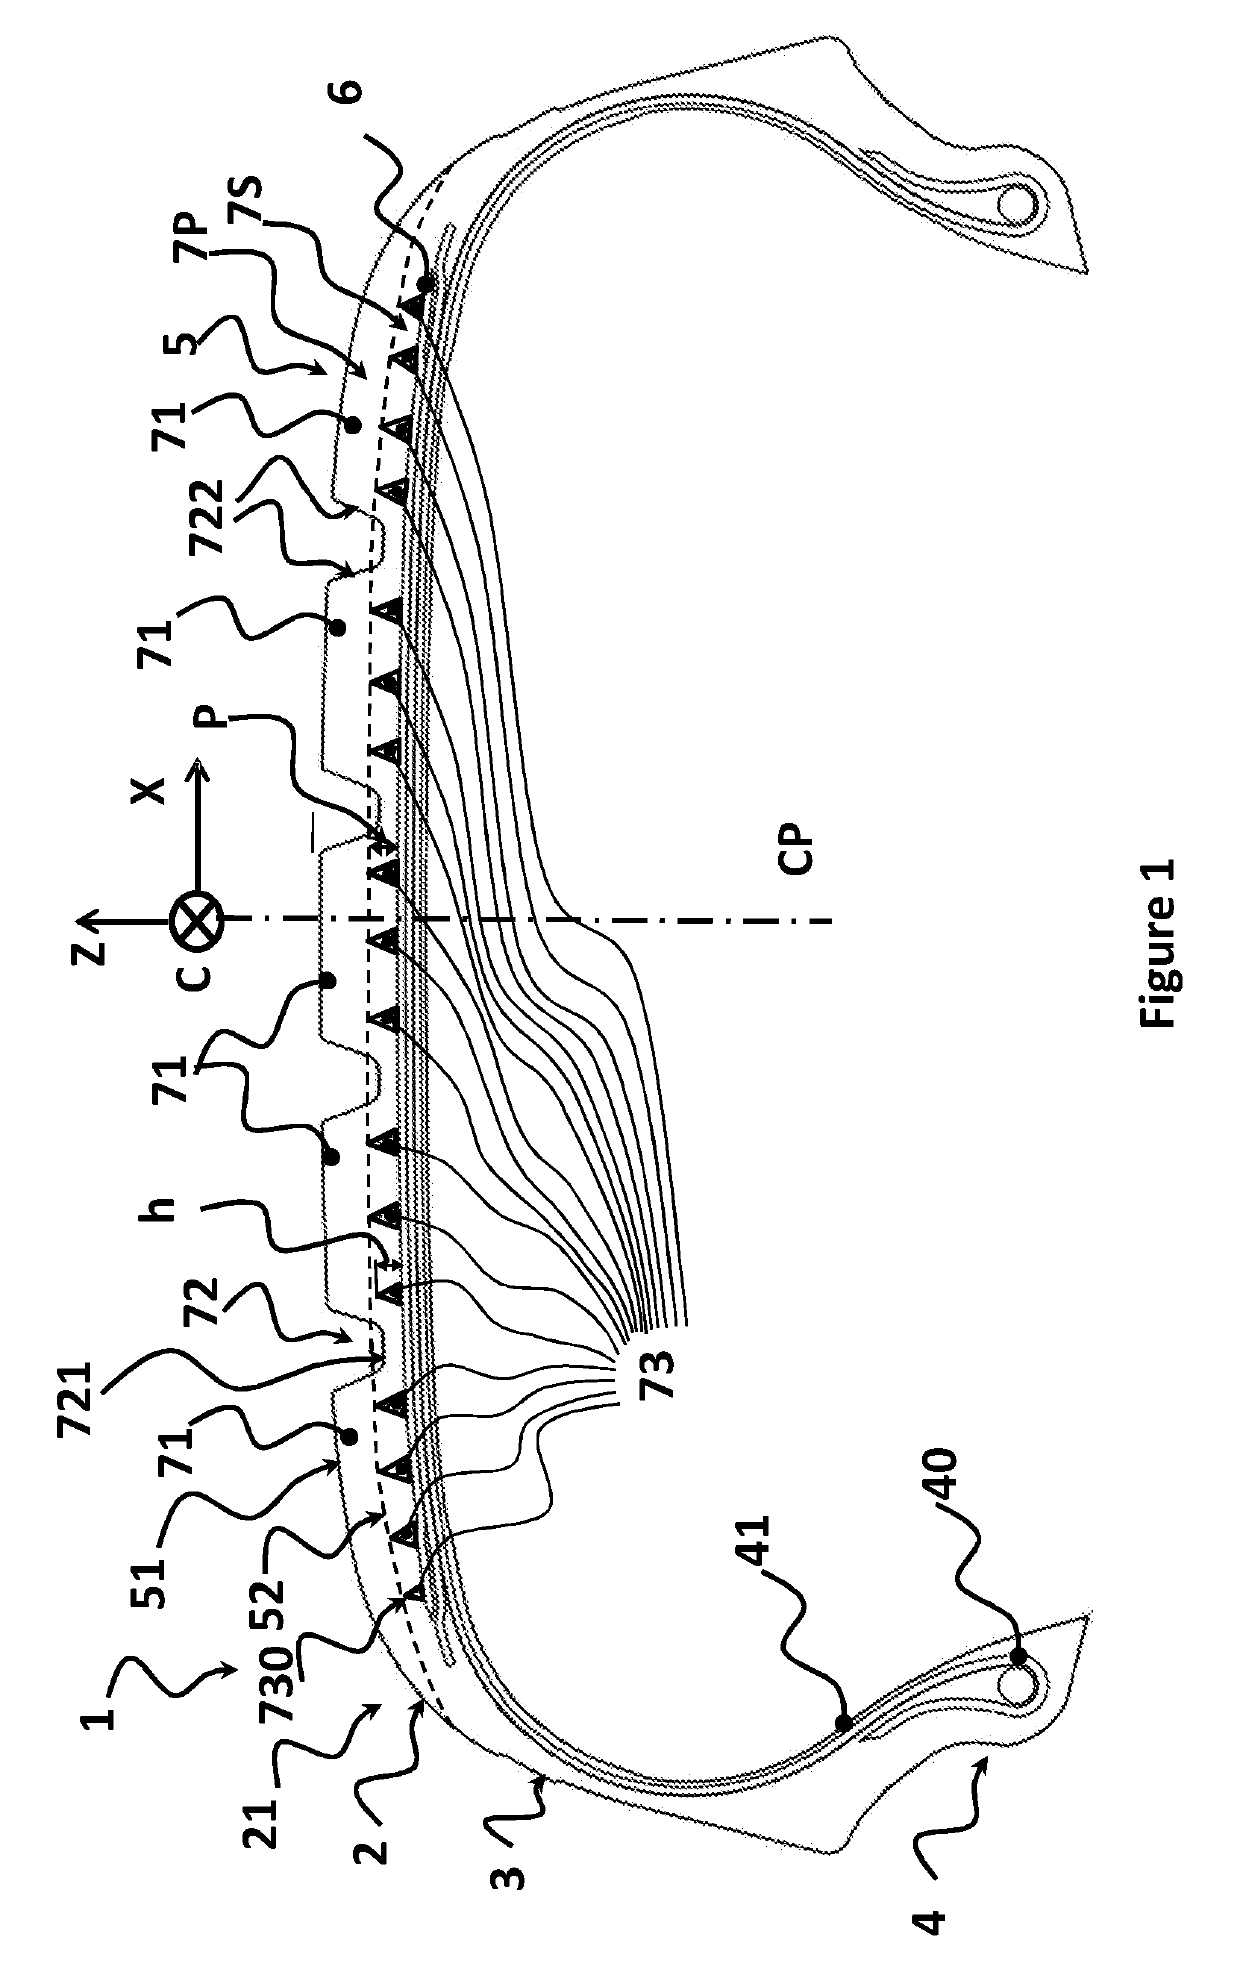 Tire comprising a tread containing circumferential reinforcing elements in the sublayer